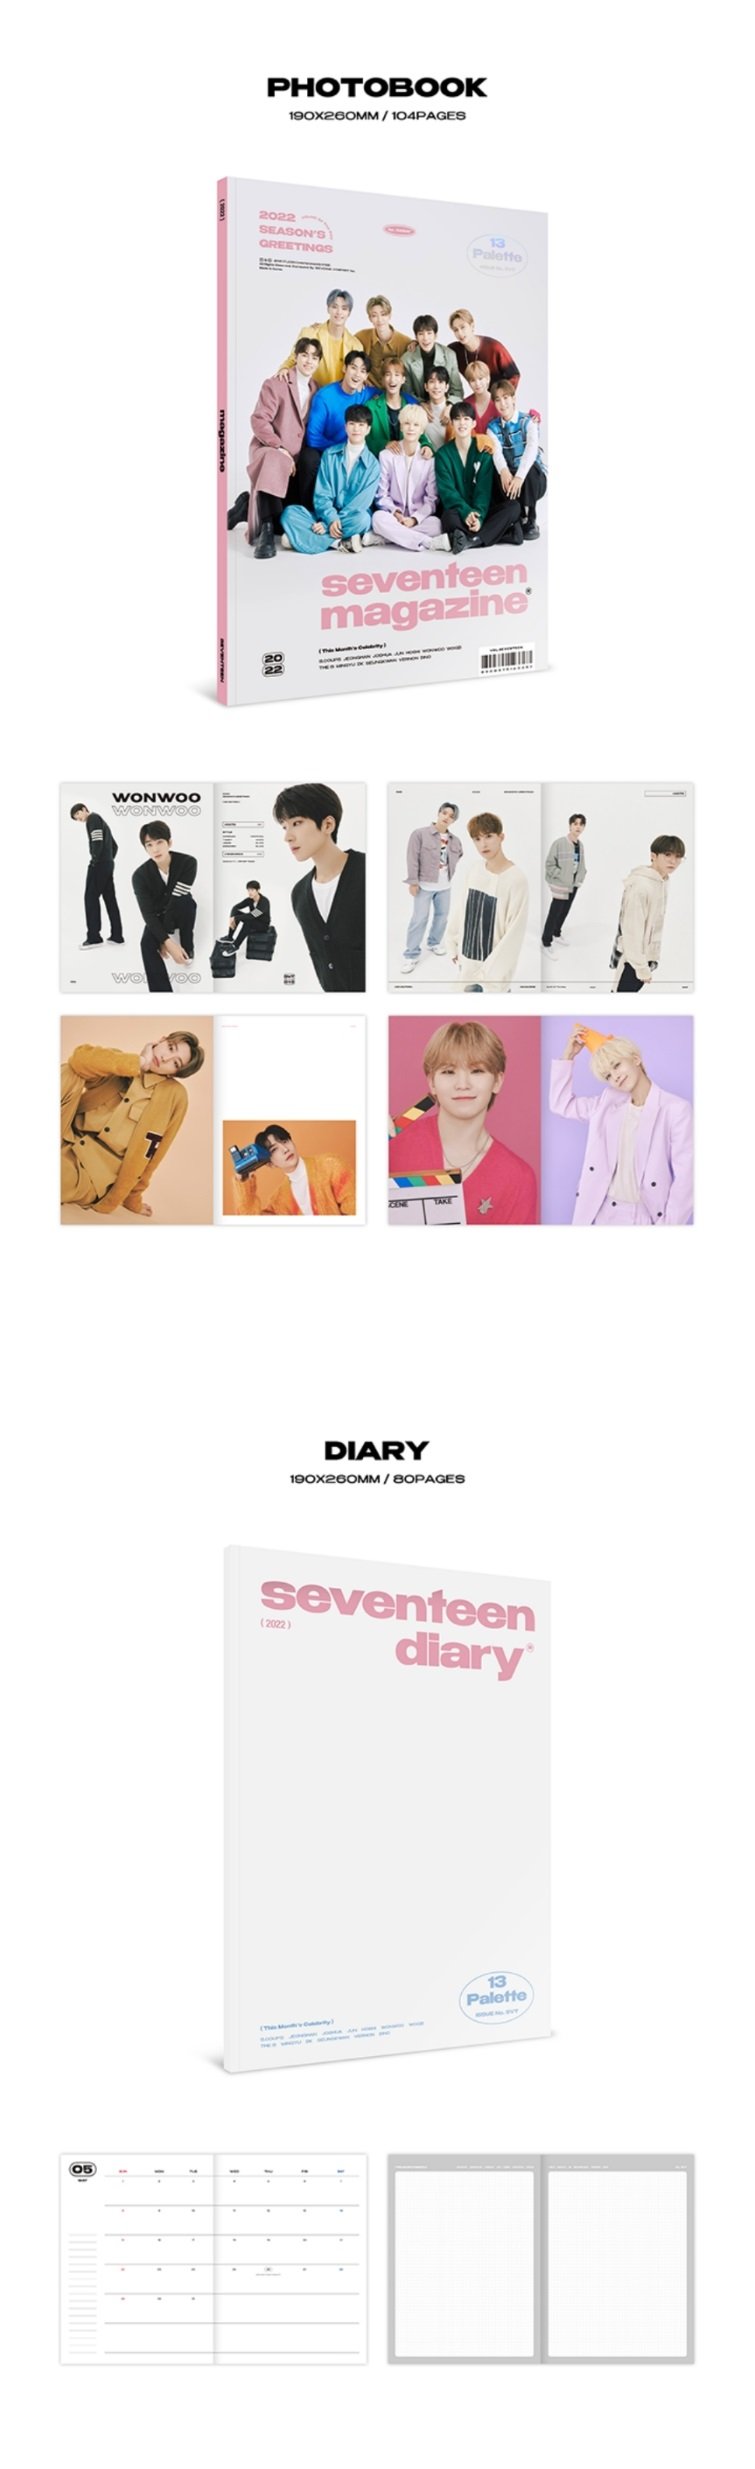 [PR] Weverse Shop SEVENTEEN - 2022 SEASON'S GREETINGS & WALL CALENDAR OUTFIT OF THE DAY